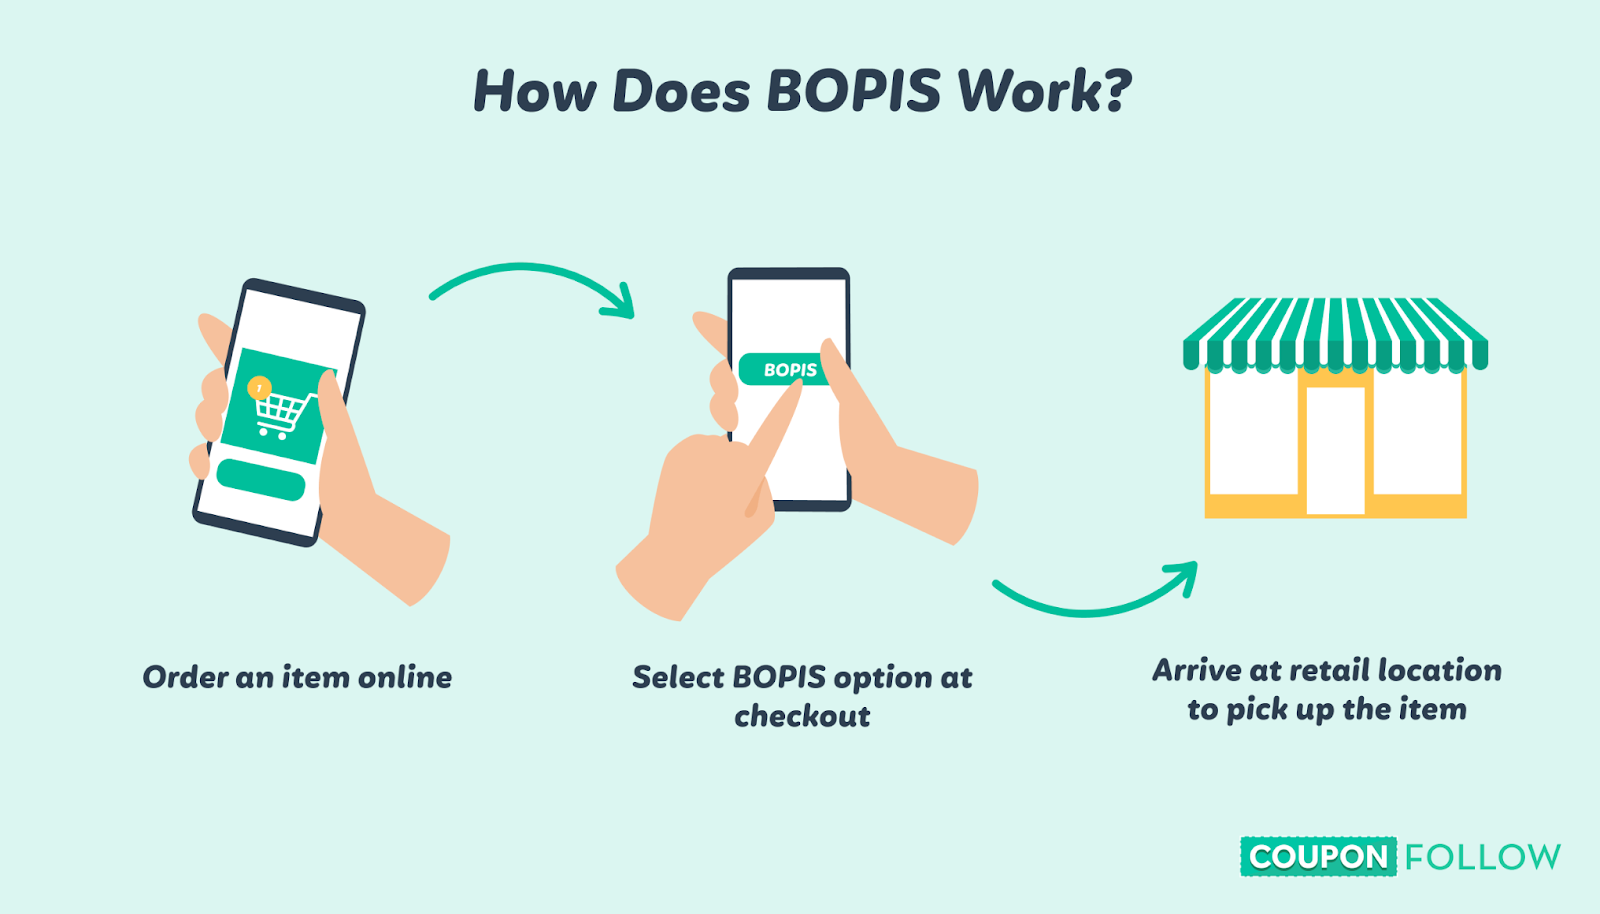 An image showing how BOPIS works in retail